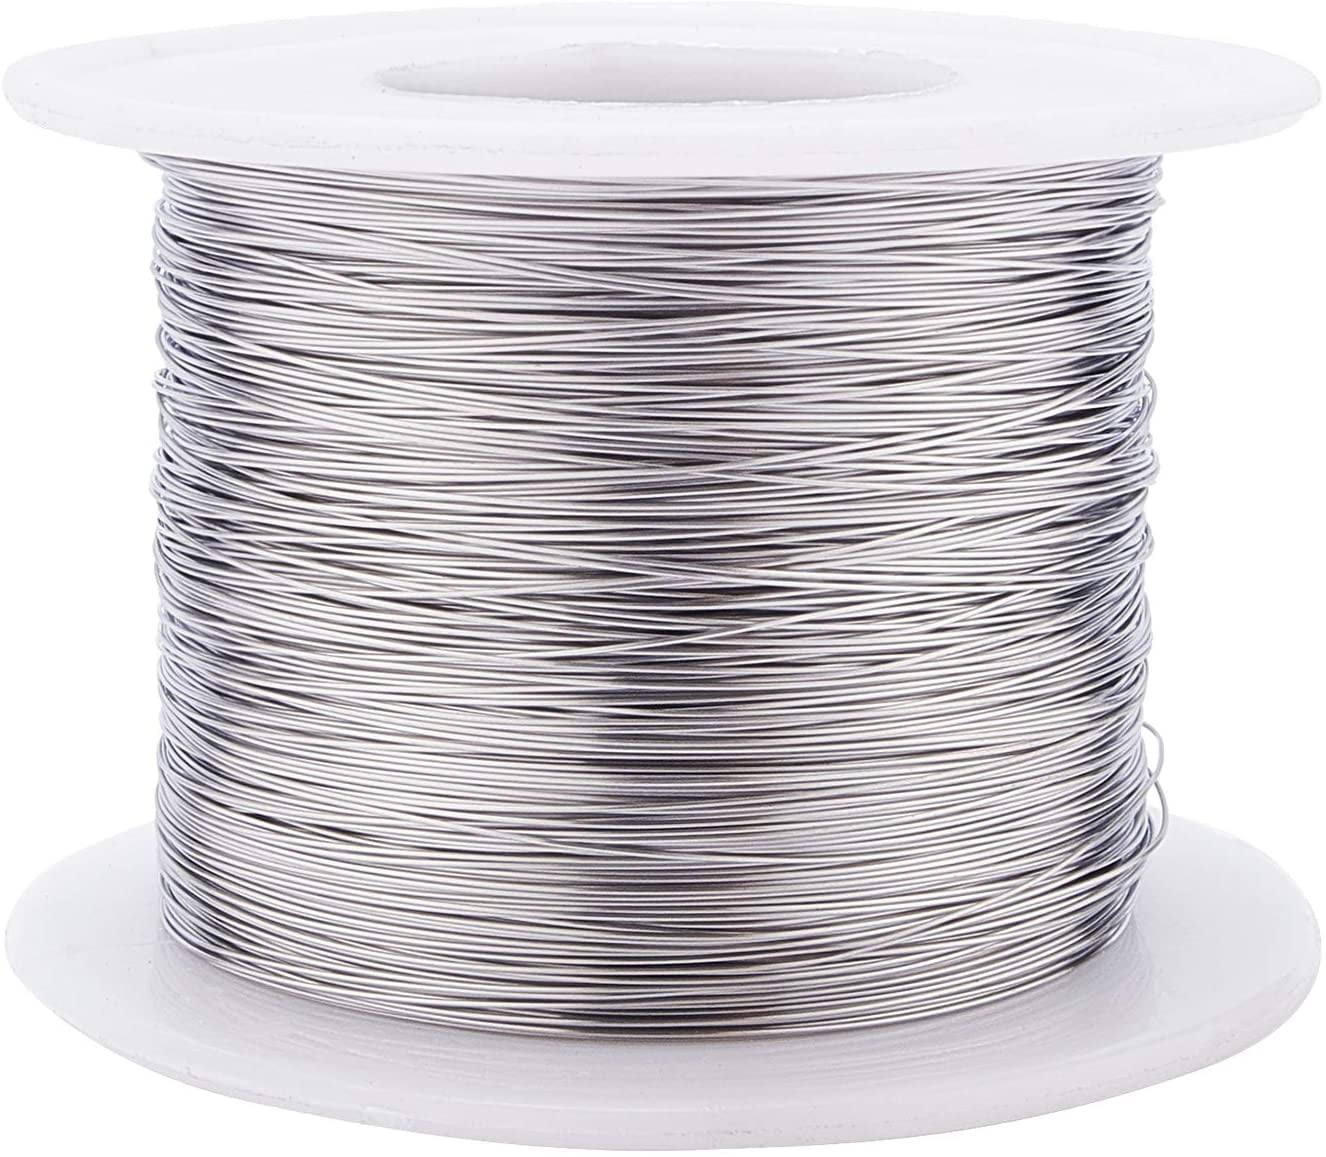 Shop Stainless Steel Wire For Jewelry Making with great discounts